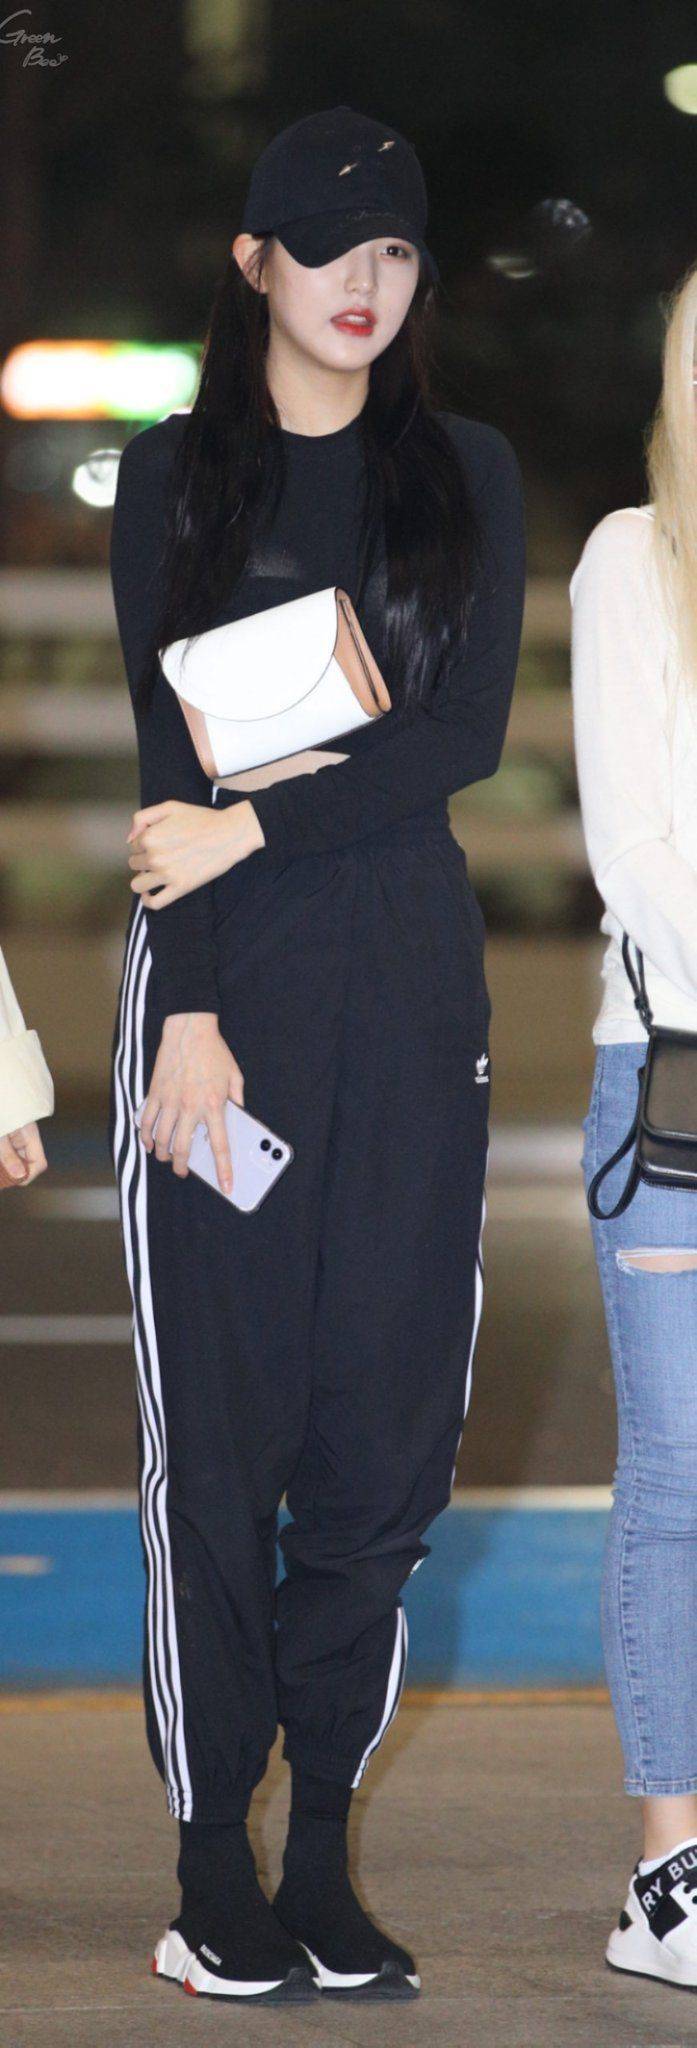 Jang Won Young is tall in sweatpants